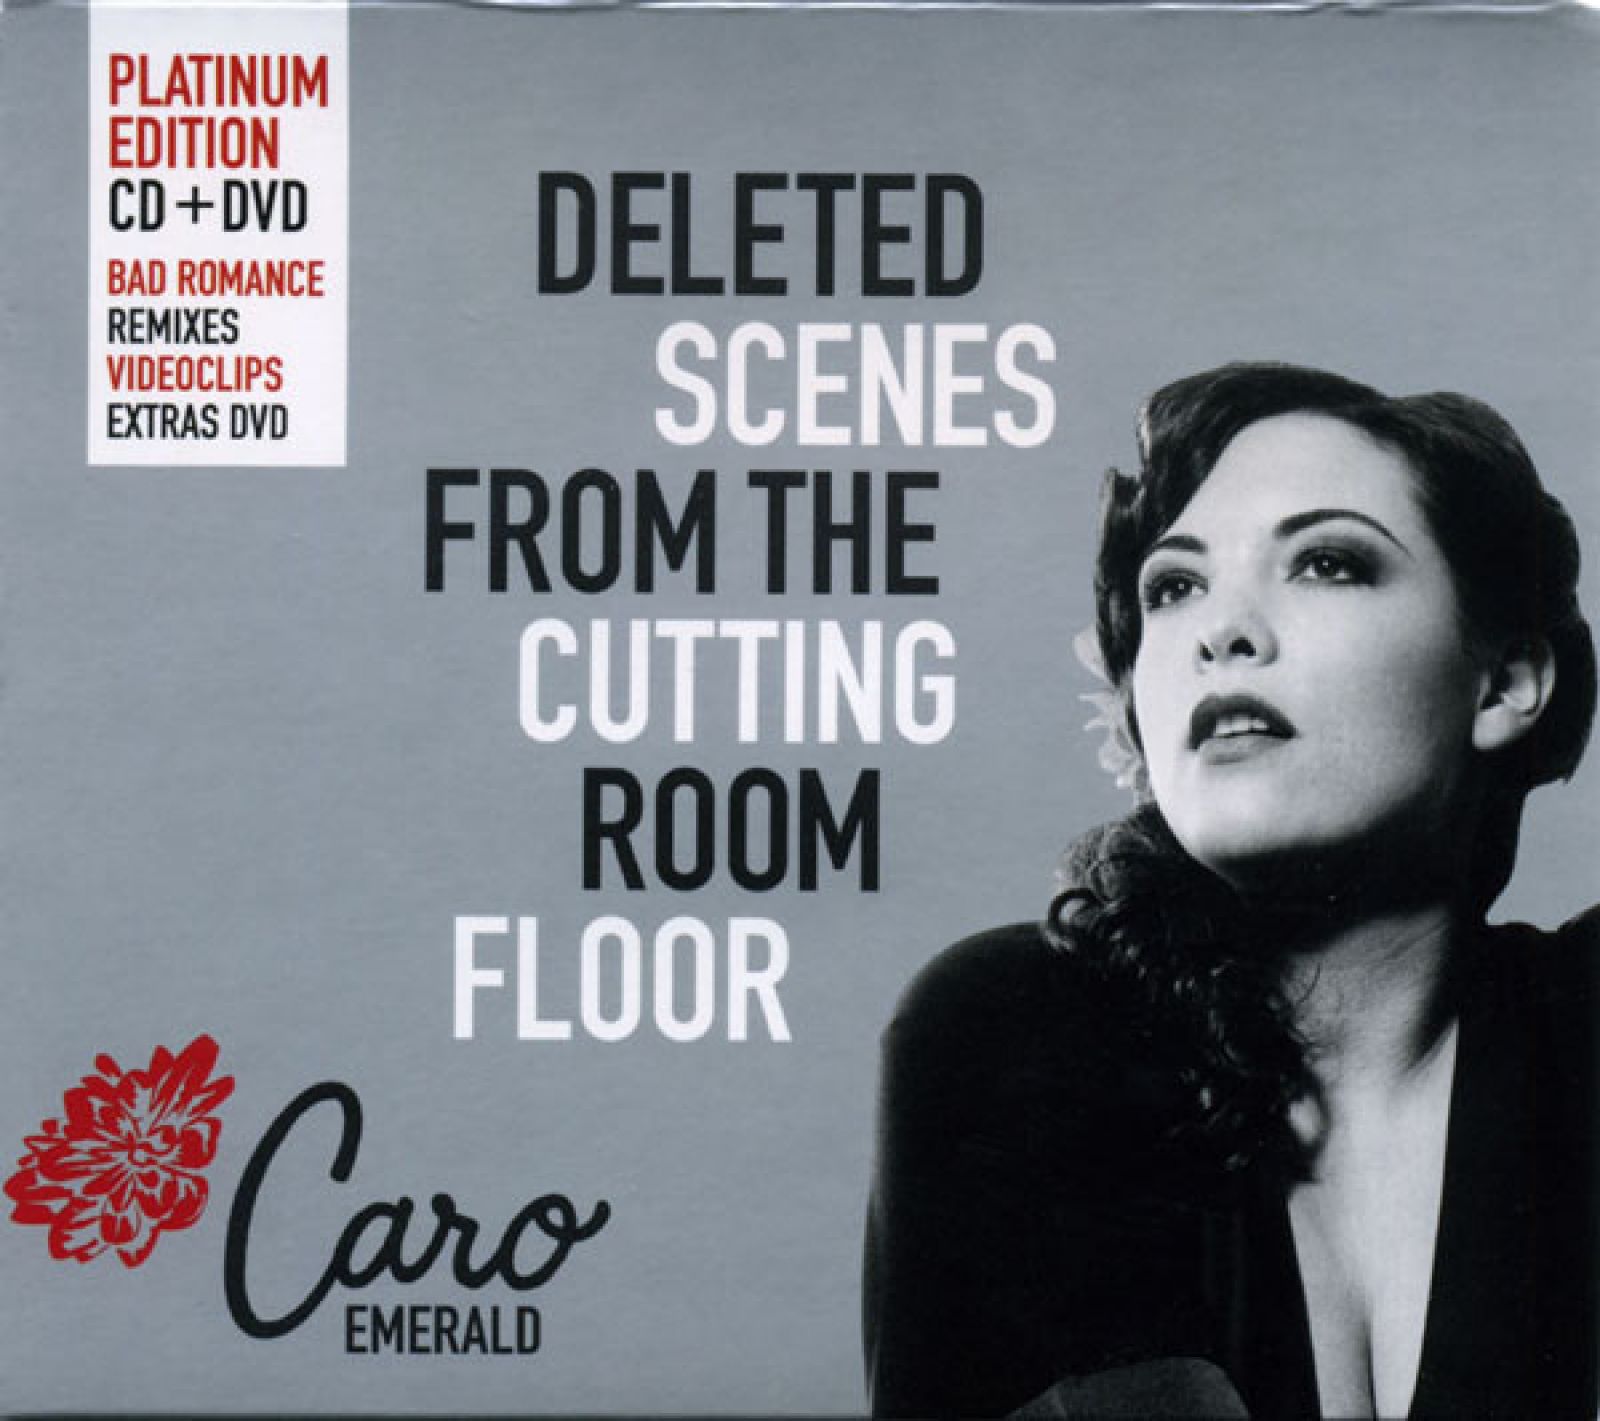 Cd Deleted Scenes From The Cutting Room Floor Emerald Caro Купить Deleted Scenes From The 4978